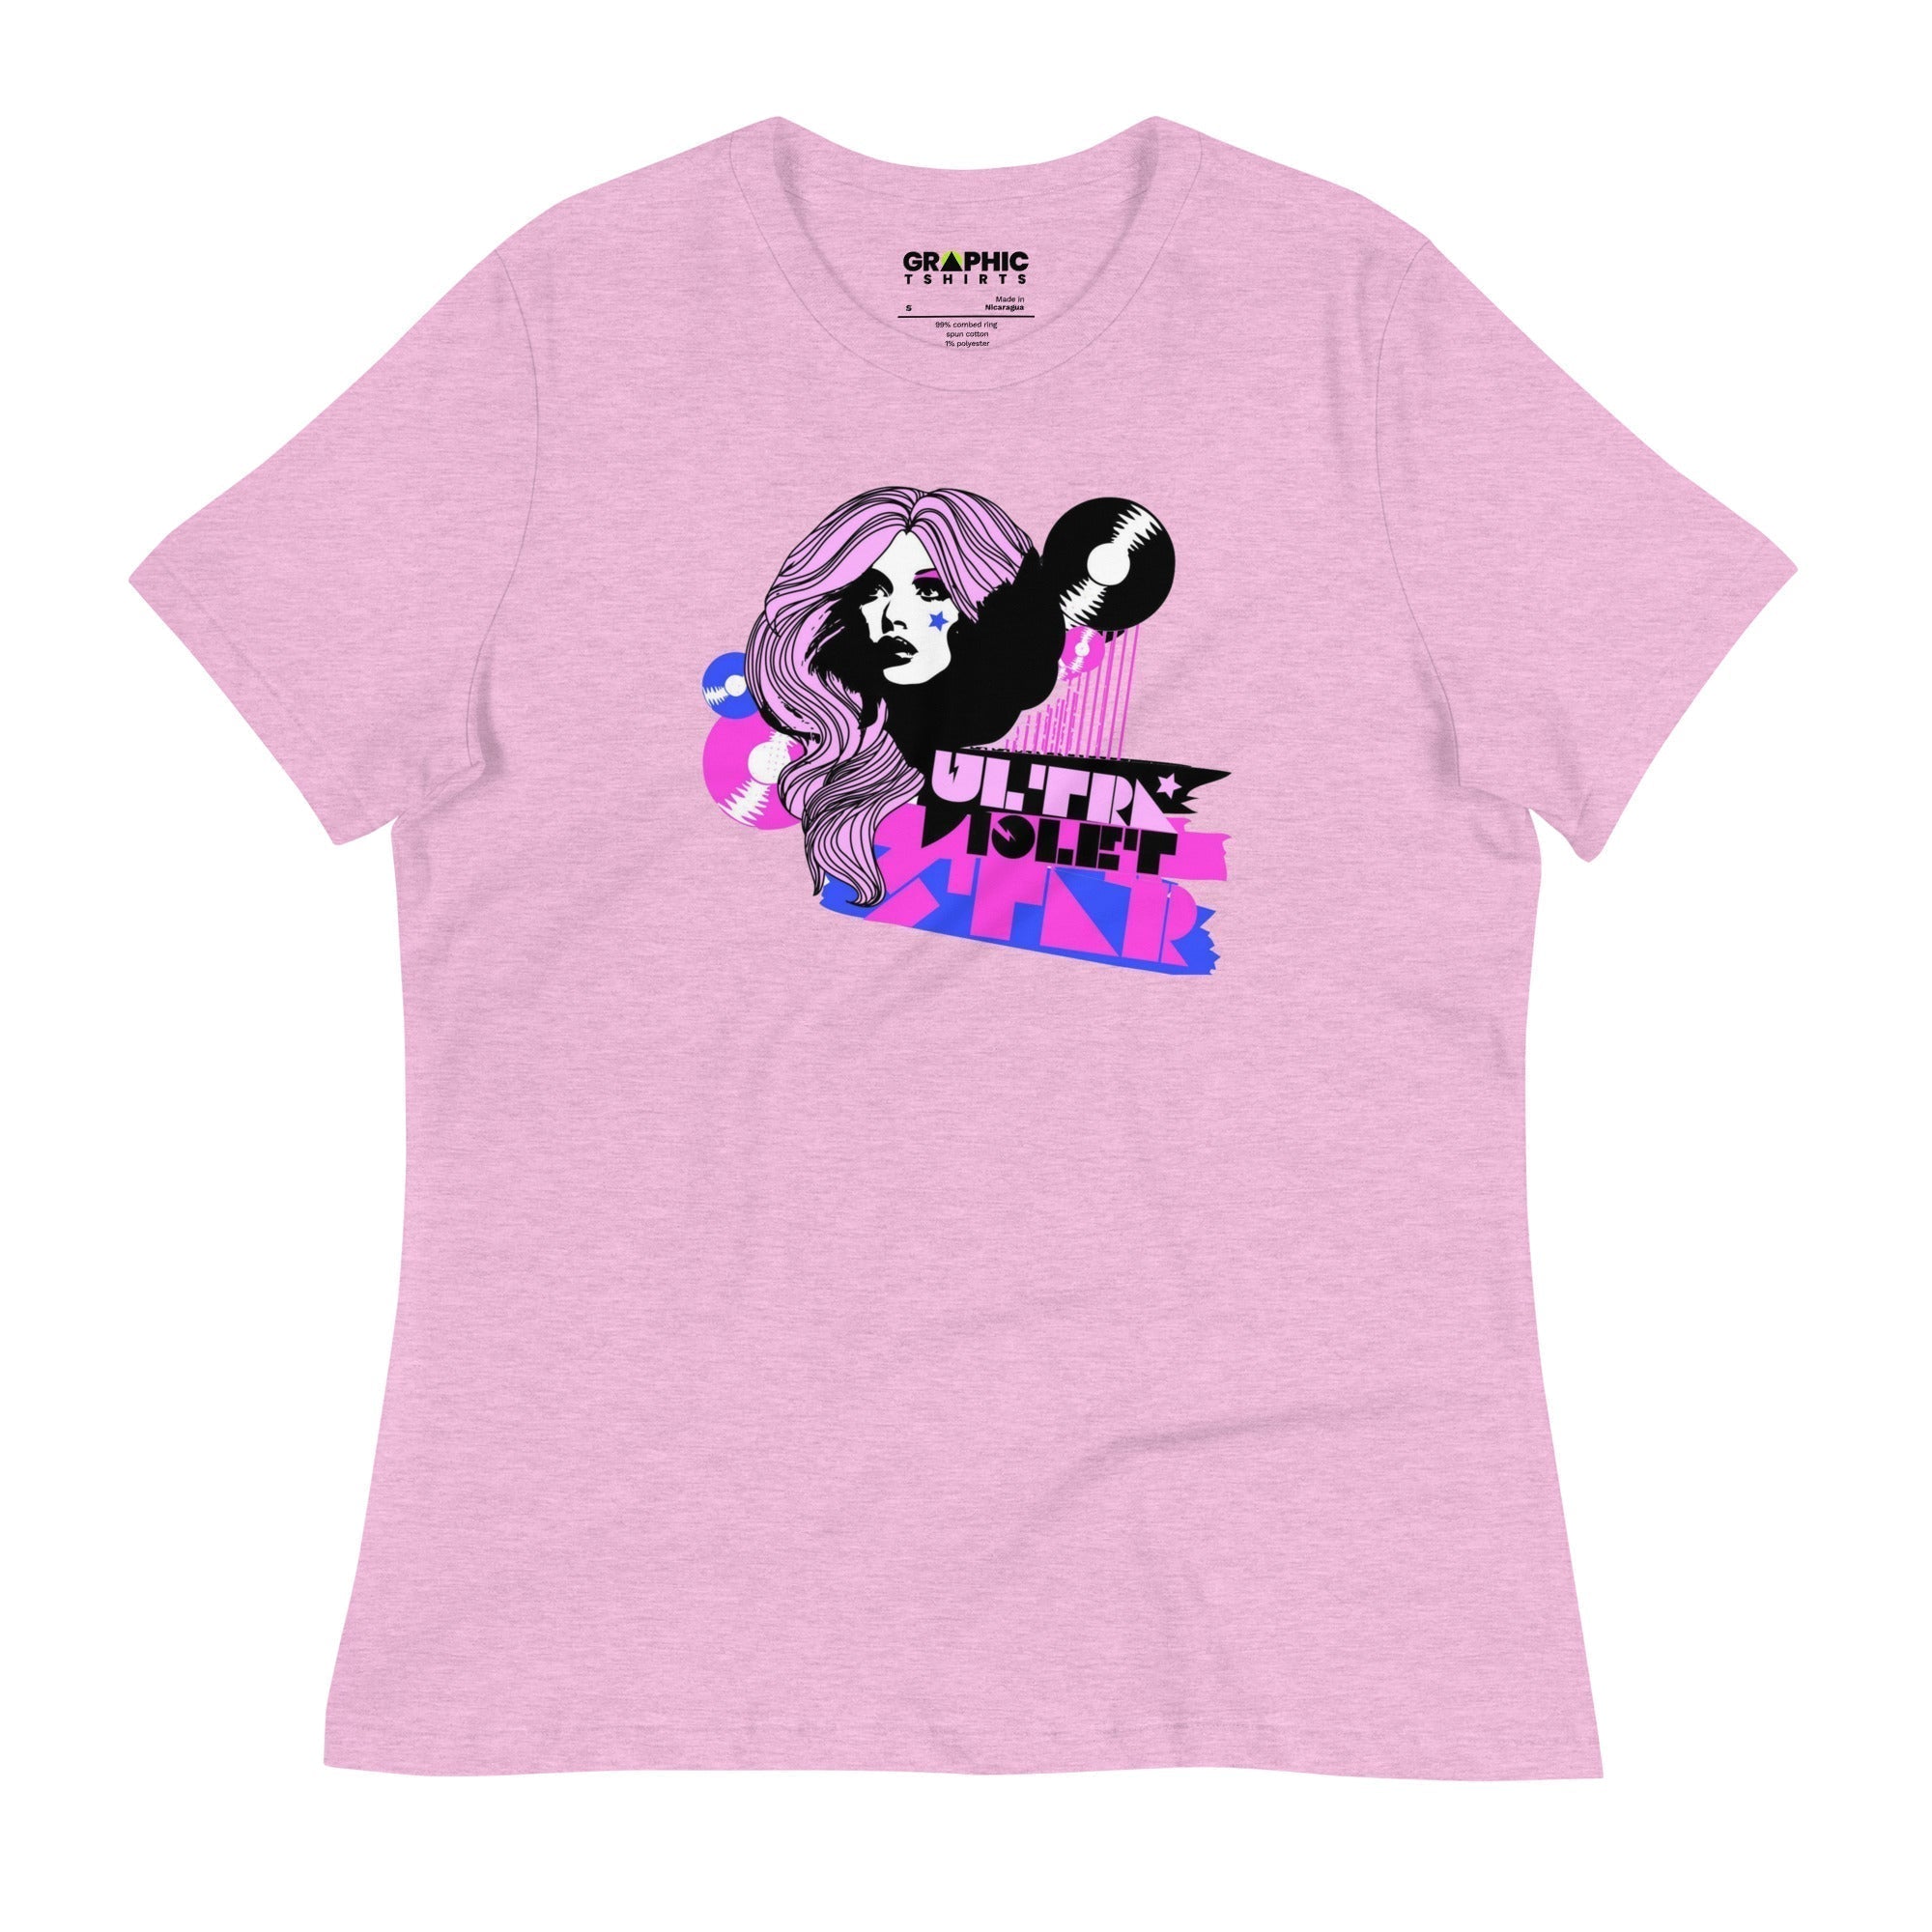 Women's Relaxed T-Shirt - Ultra Violet Star - GRAPHIC T-SHIRTS